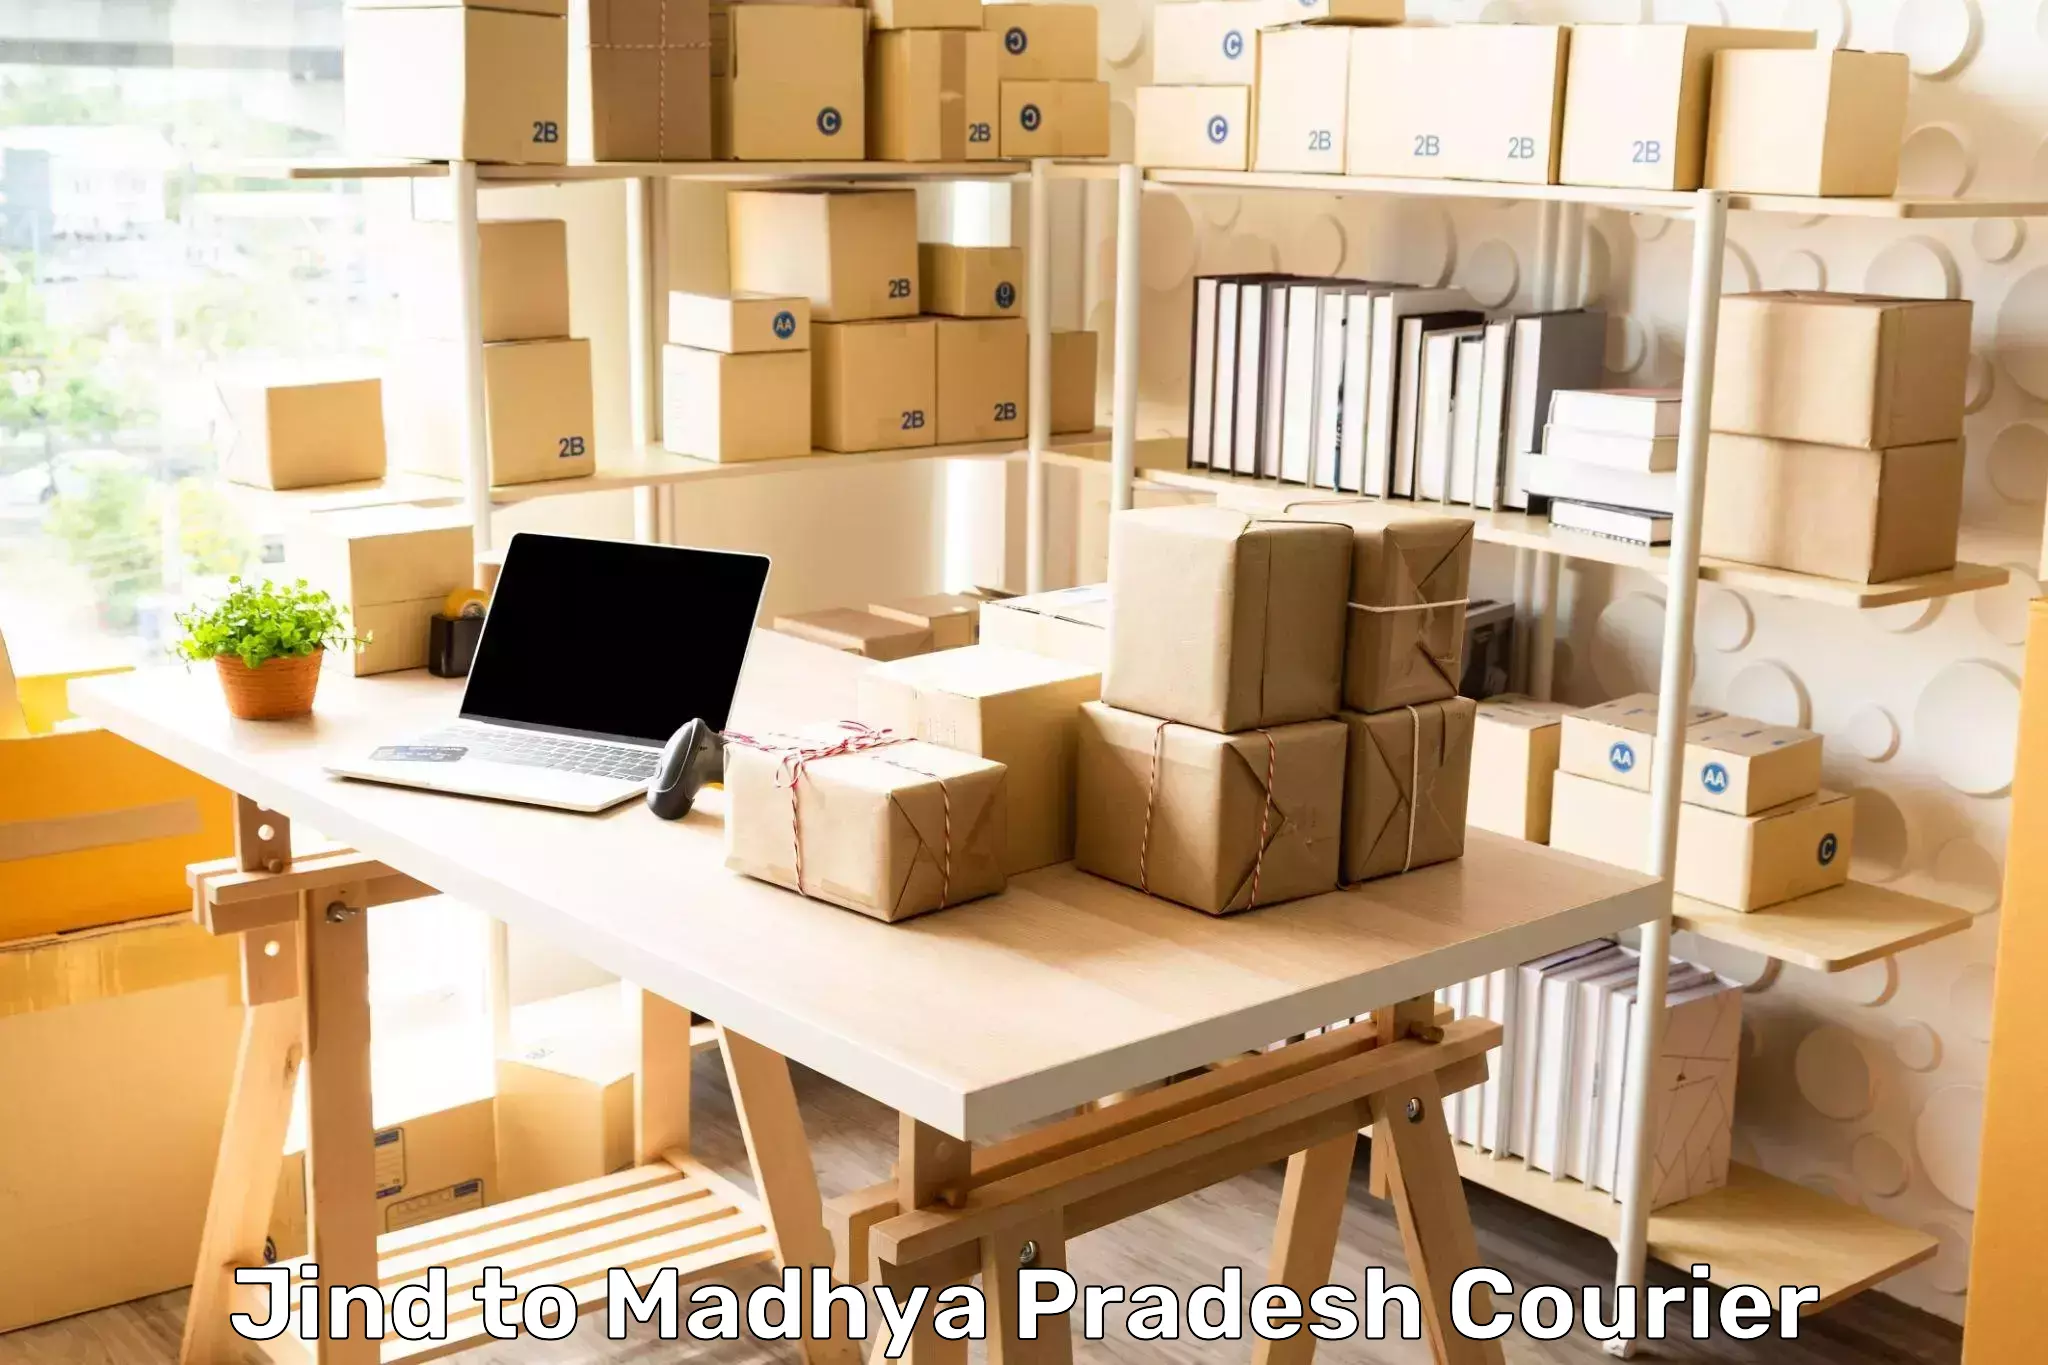 Multi-service courier options Jind to Balaghat